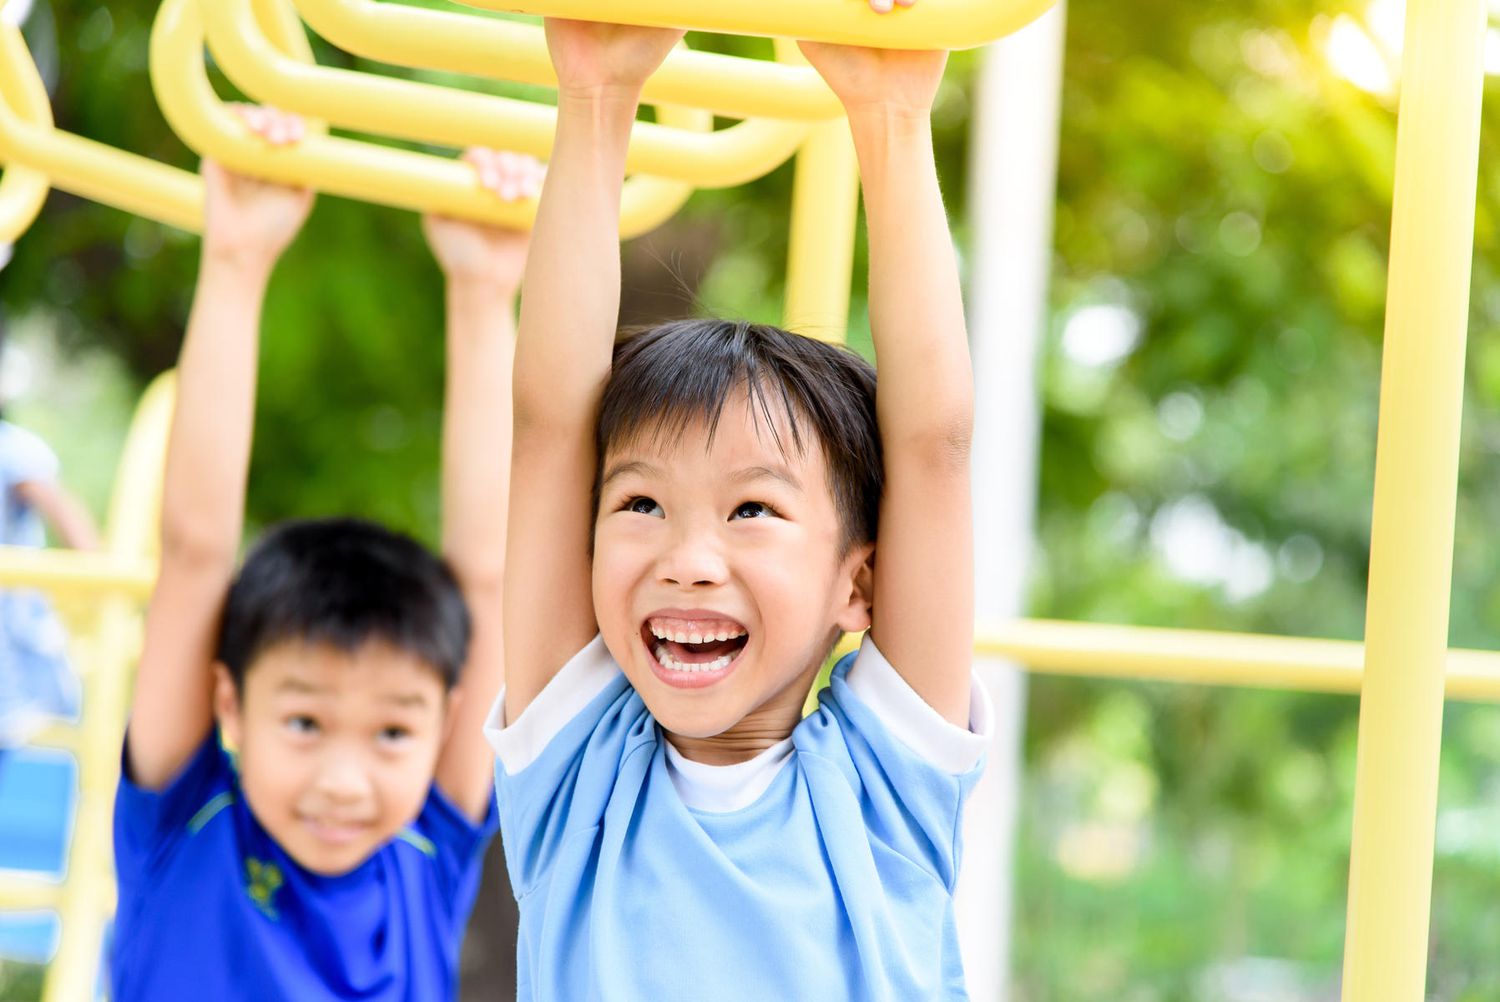 Kids are being injured on playgrounds more despite safety advancements.